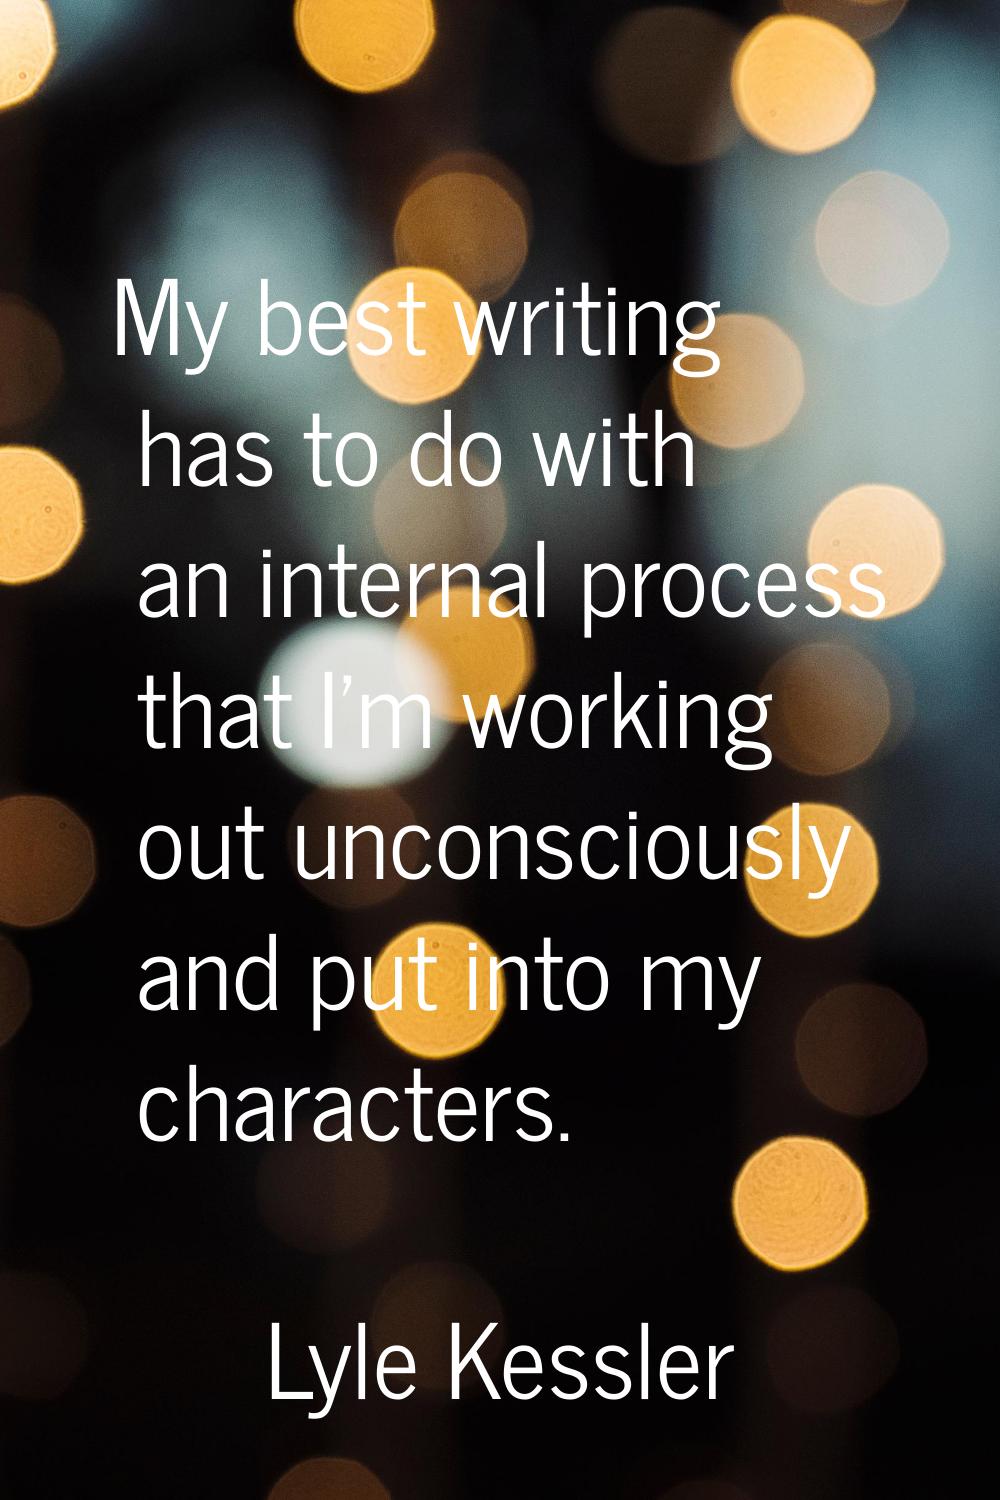 My best writing has to do with an internal process that I'm working out unconsciously and put into 